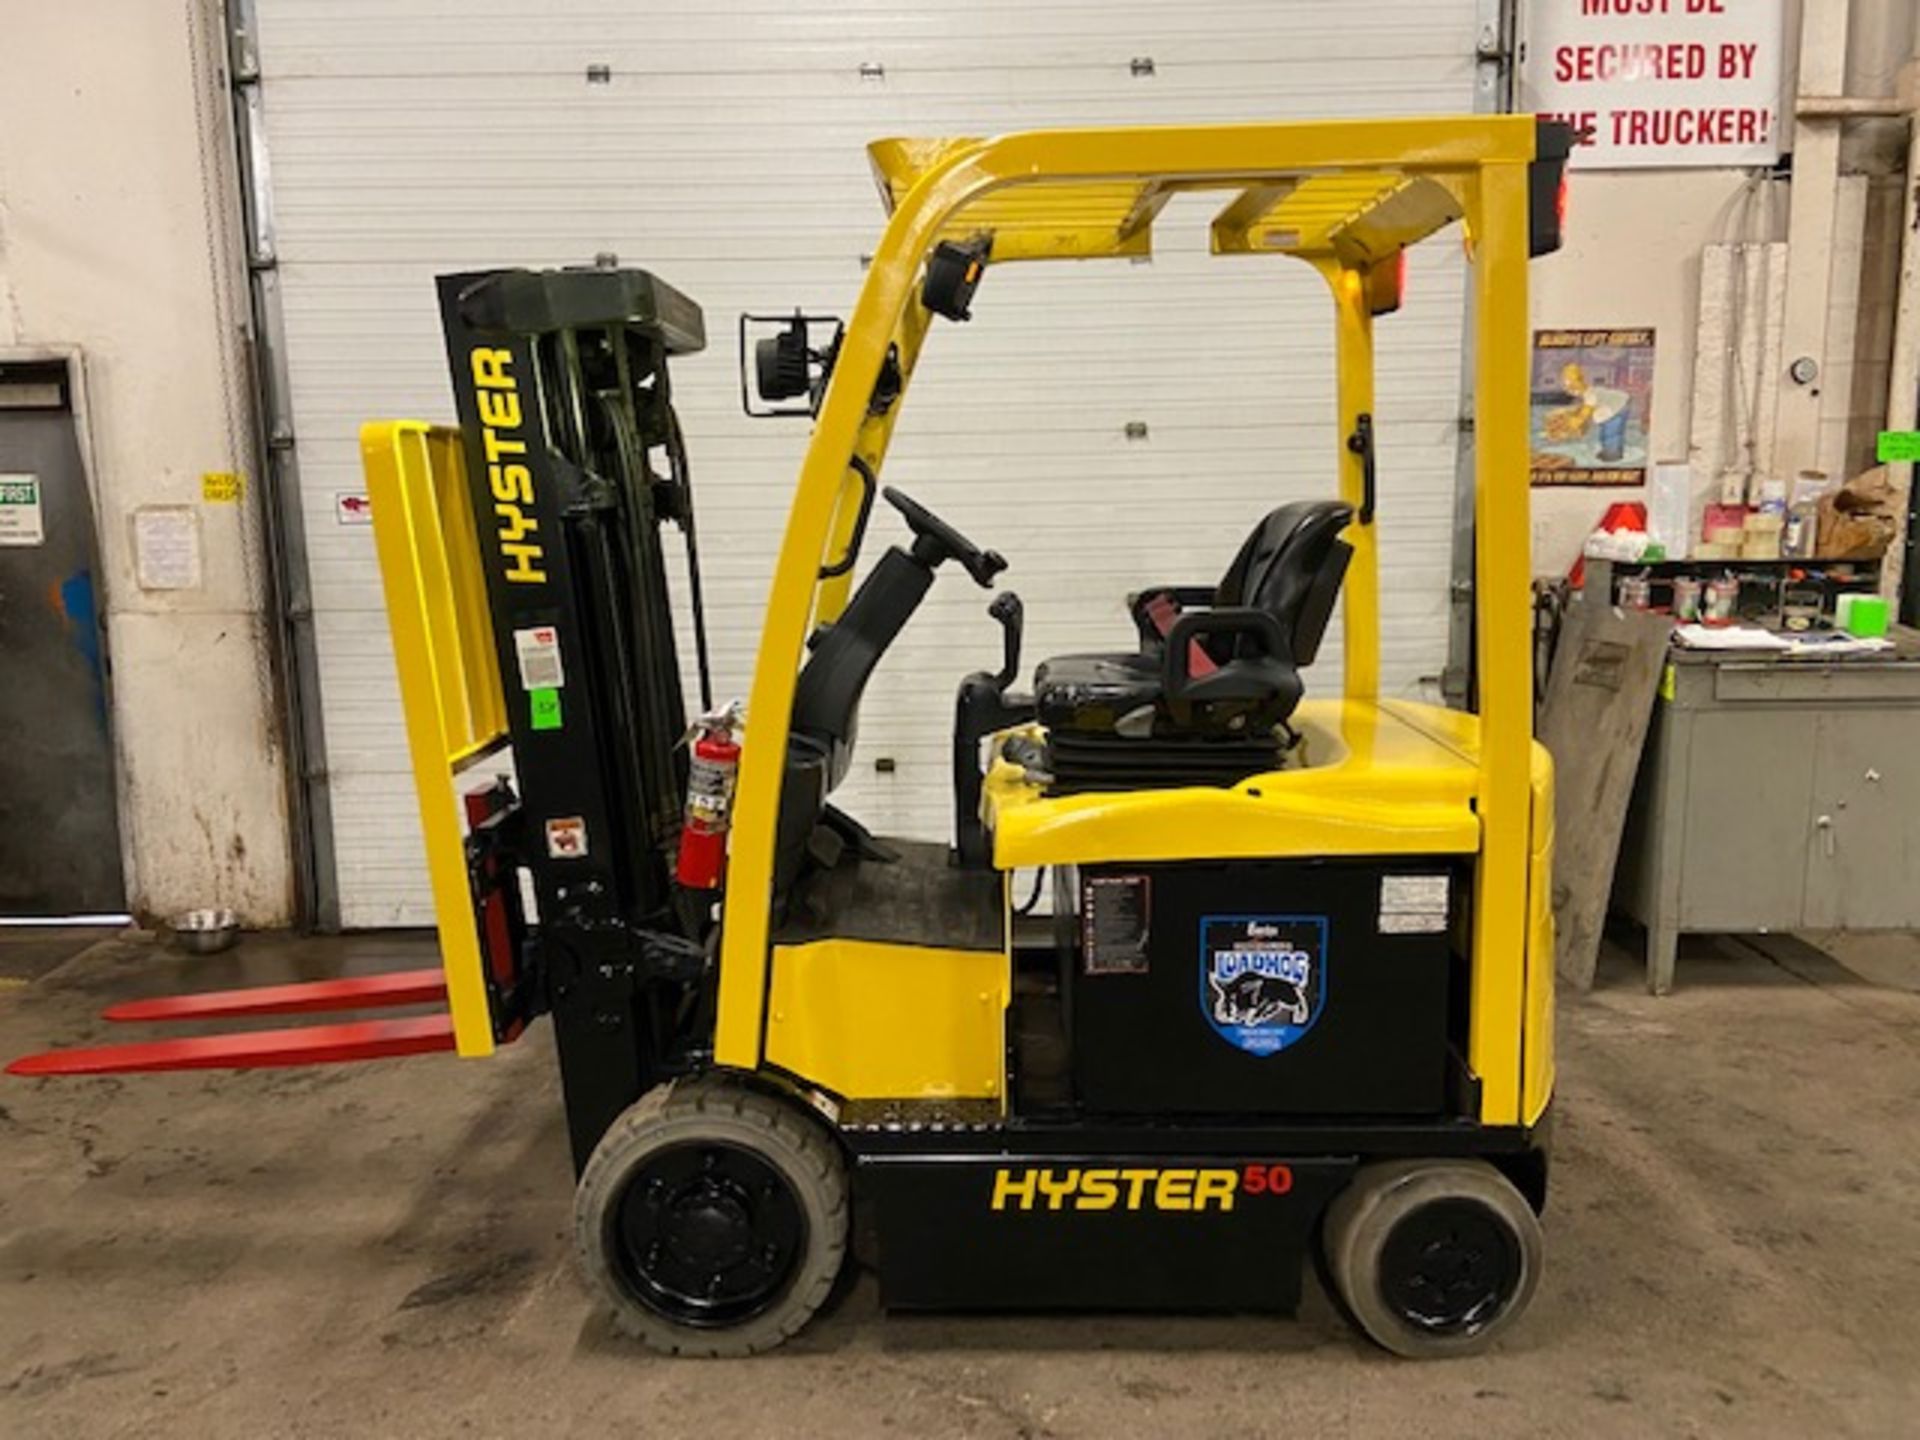 FREE CUSTOMS - 2016 Hyster 5000lbs Capacity Forklift SAFETY INTO 2021 Electric with 3-STAGE MAST